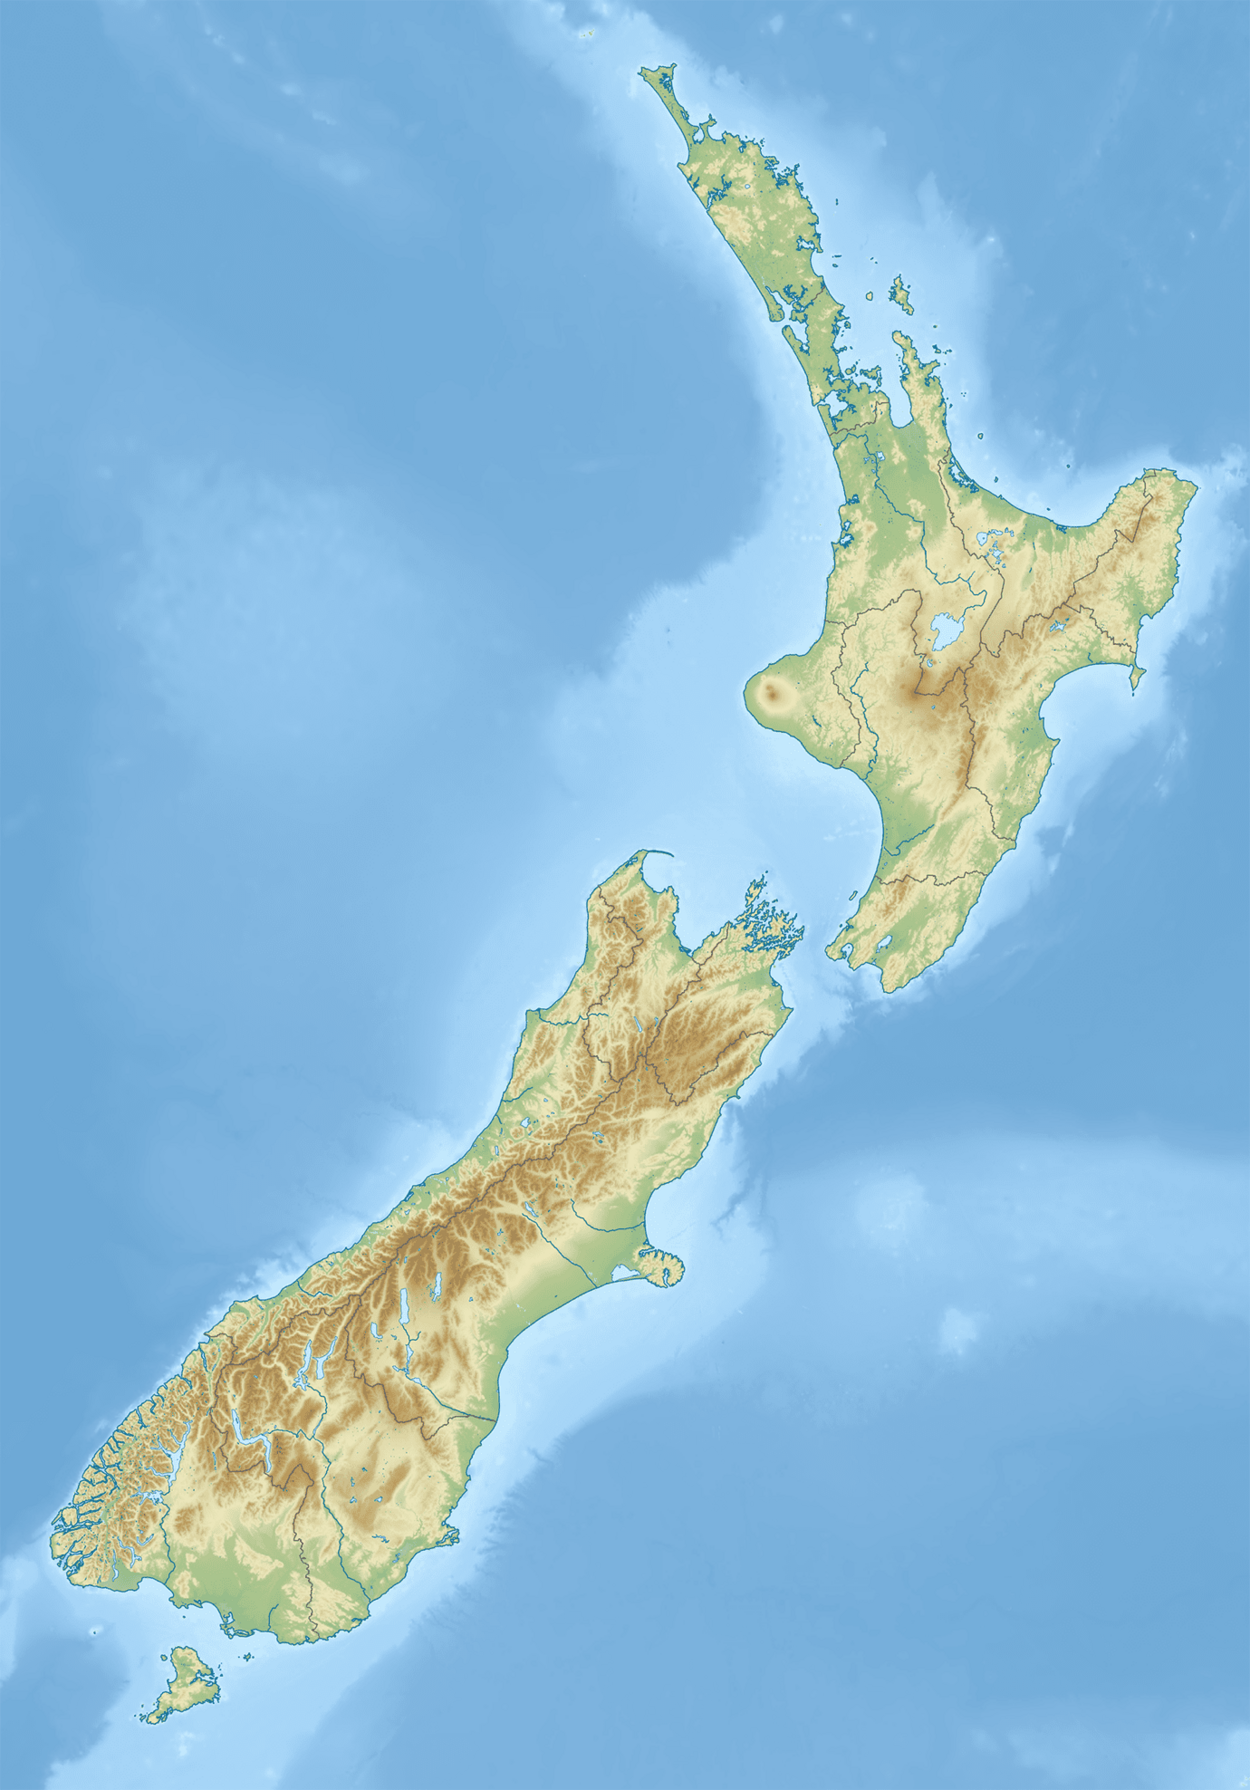 New Zealand (relief map).png